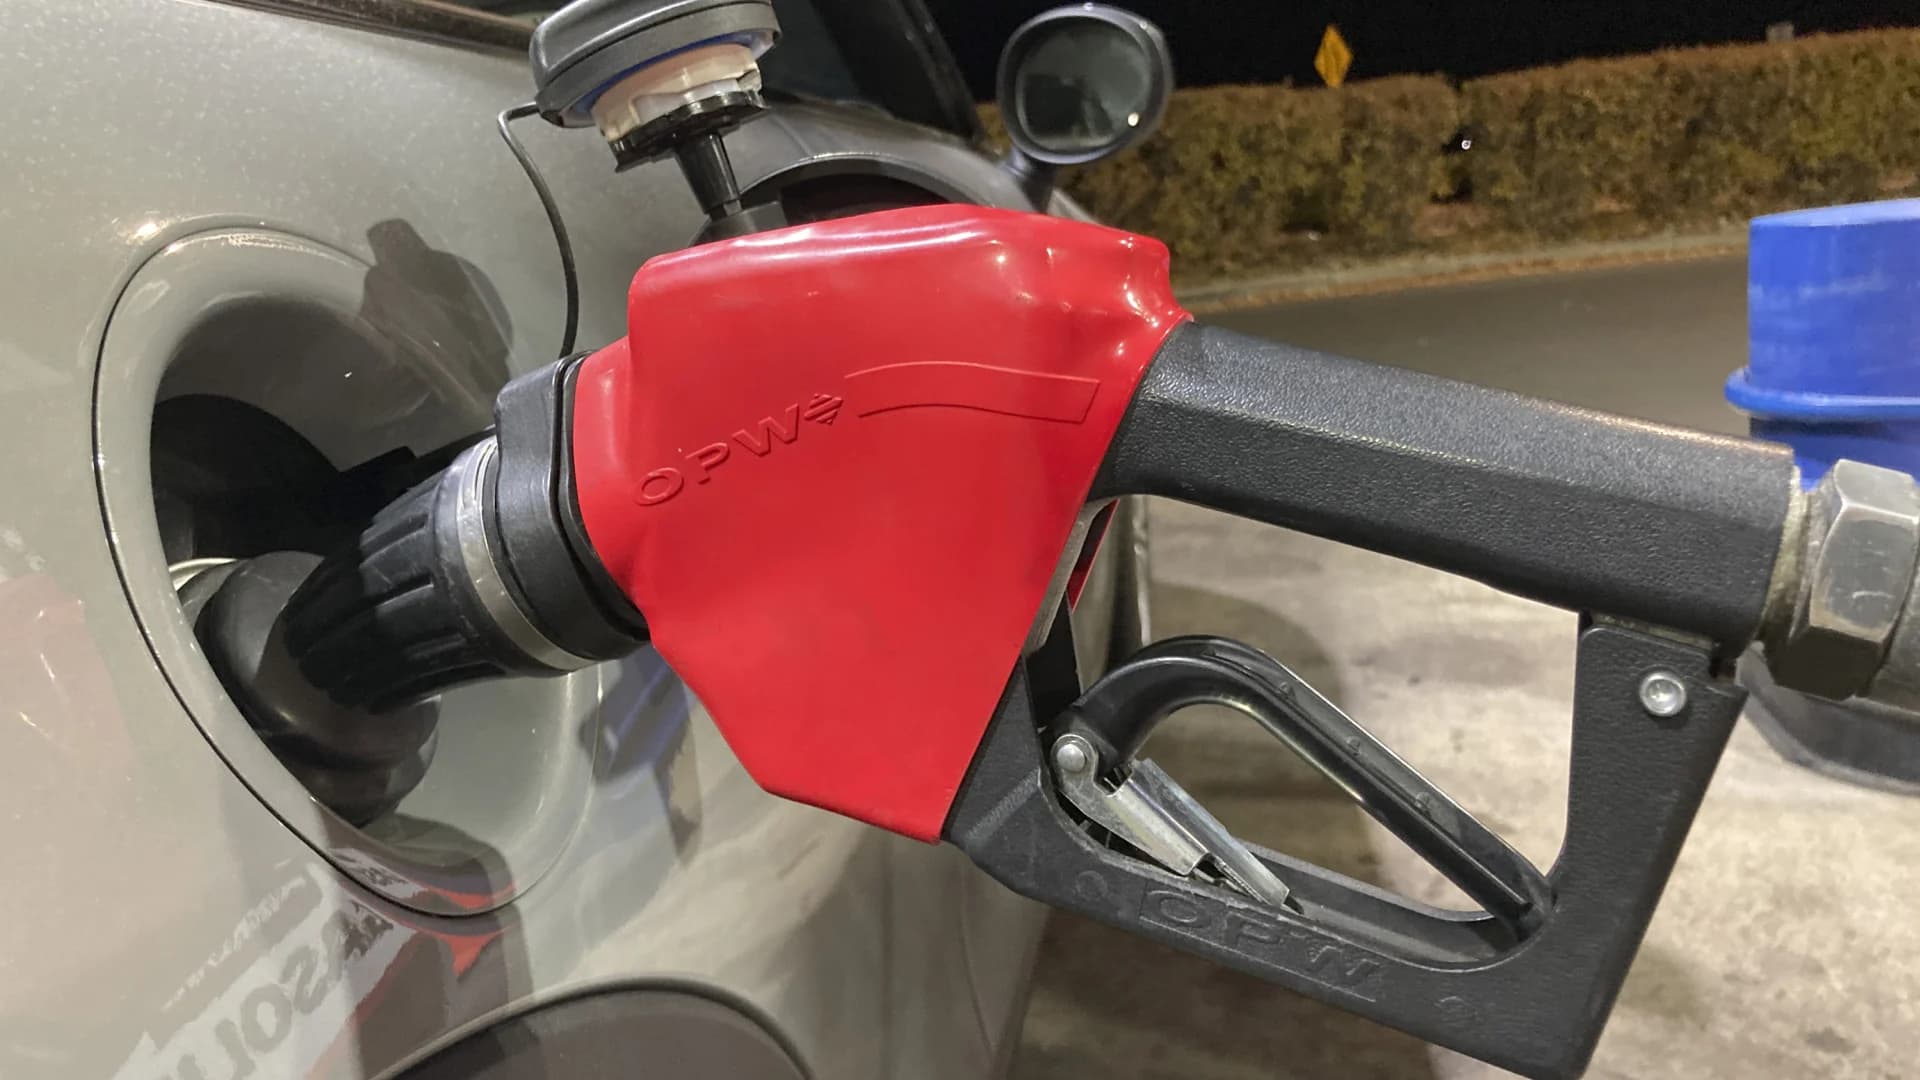 Average US gas price drops 2 pennies over 3 weeks to $3.39